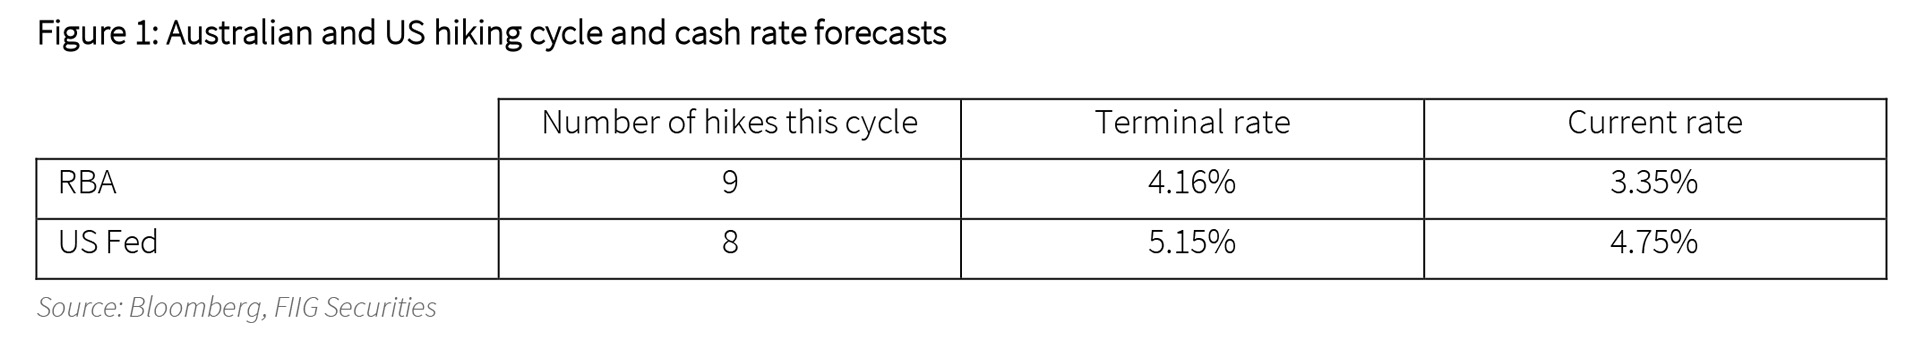 Figure 1 - Australian and US hiking cycle and cash rate forecasts